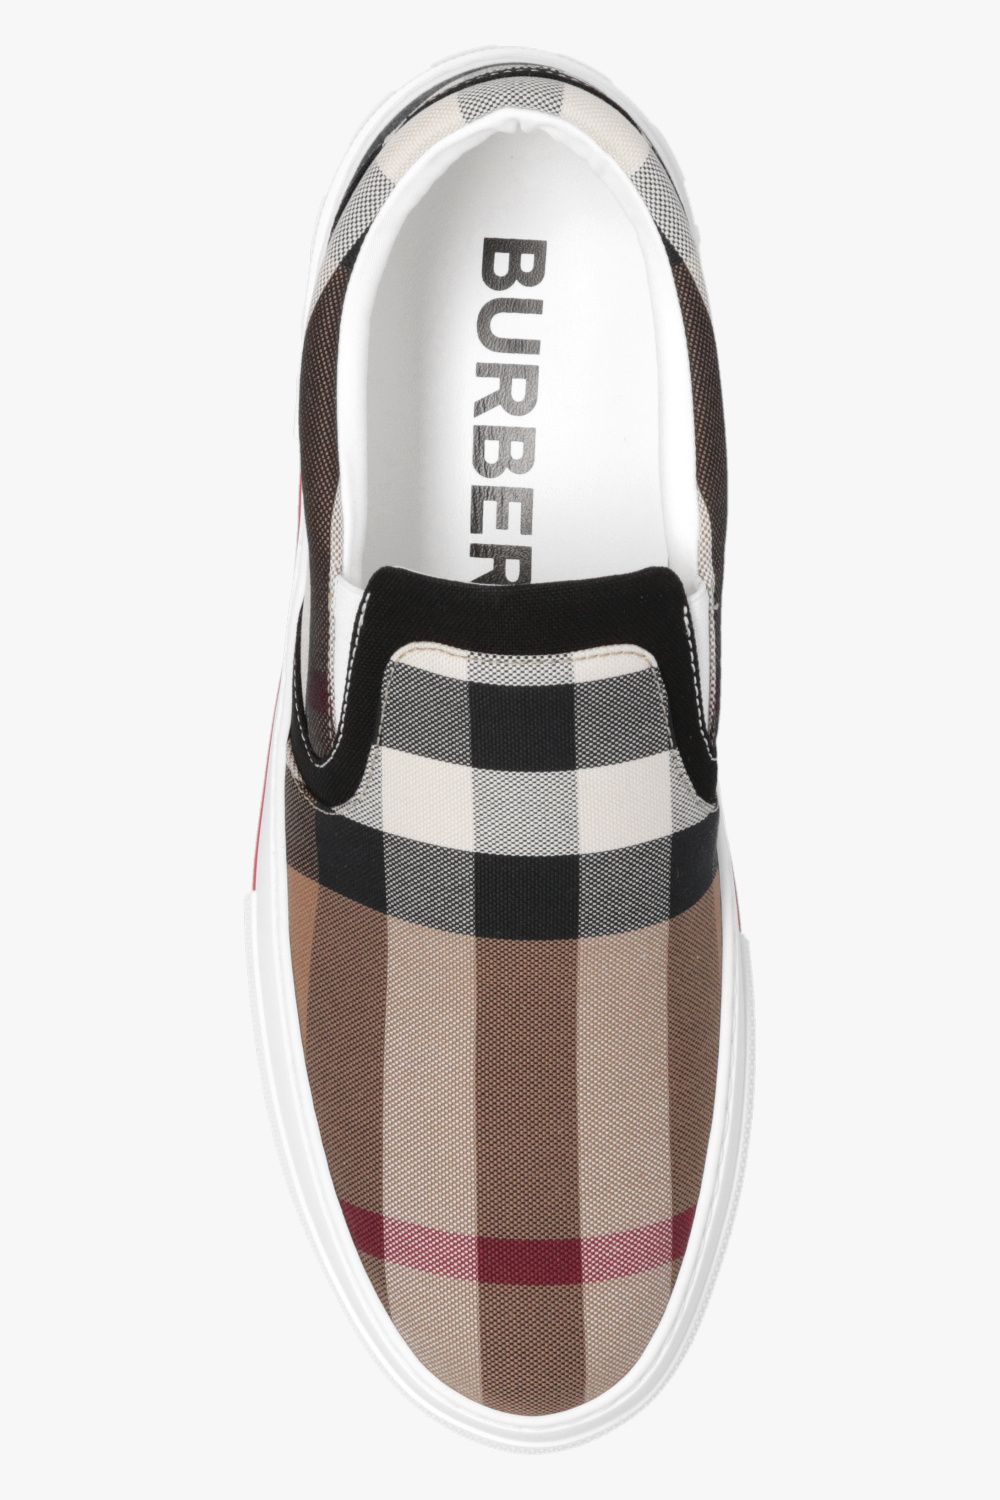 burberry set ‘Curt’ sneakers